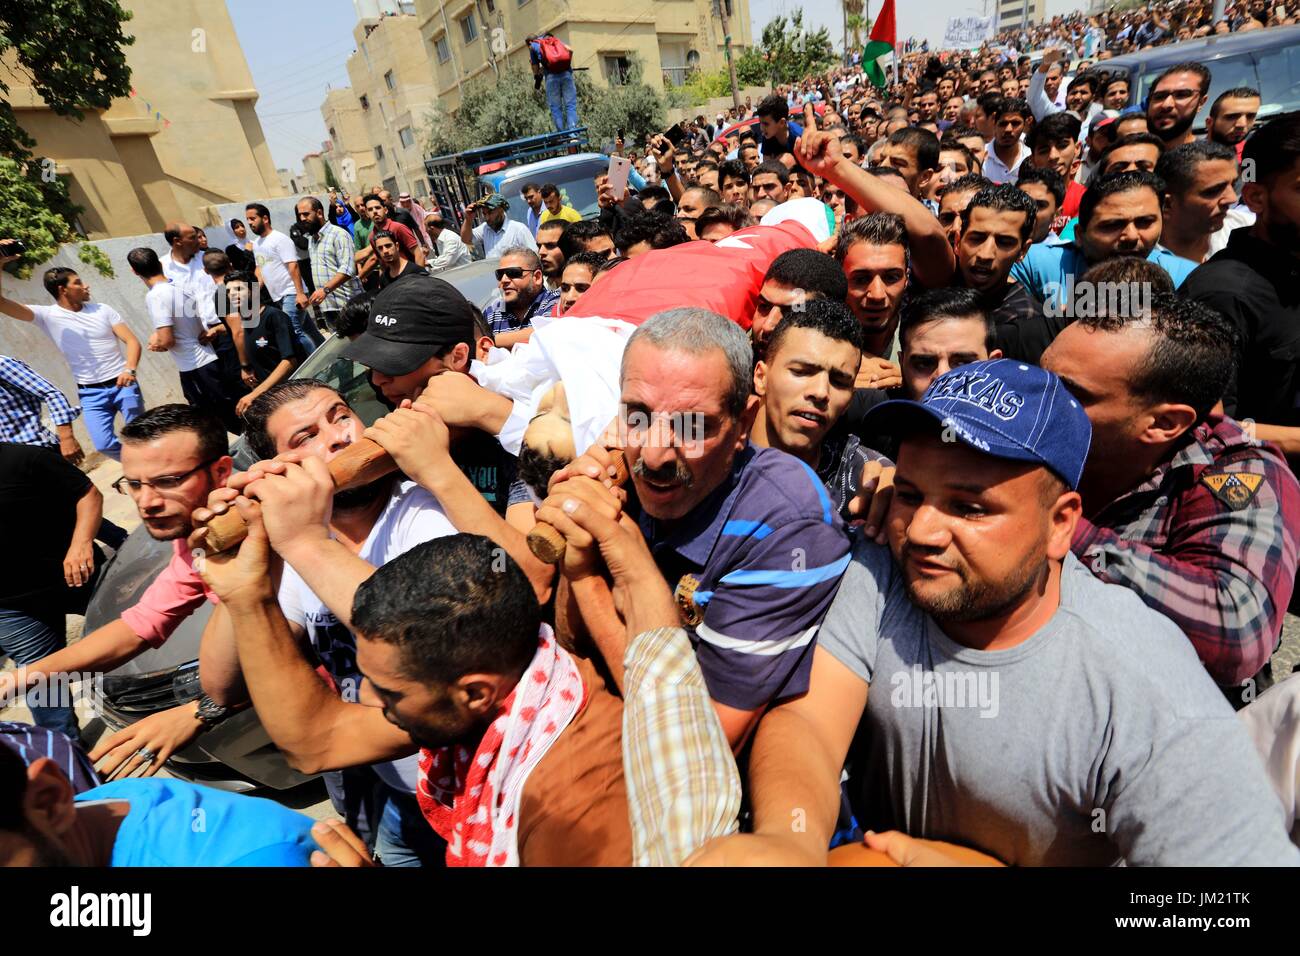 Amman, Jordan. 25th July, 2017. Jordanian people attend the funeral of  Mohammad Al-Jawawdah, a victim of the Israeli embassy compound shooting  incident, in Amman, Jordan, July 25, 2017. Thousands of Jordanians attended